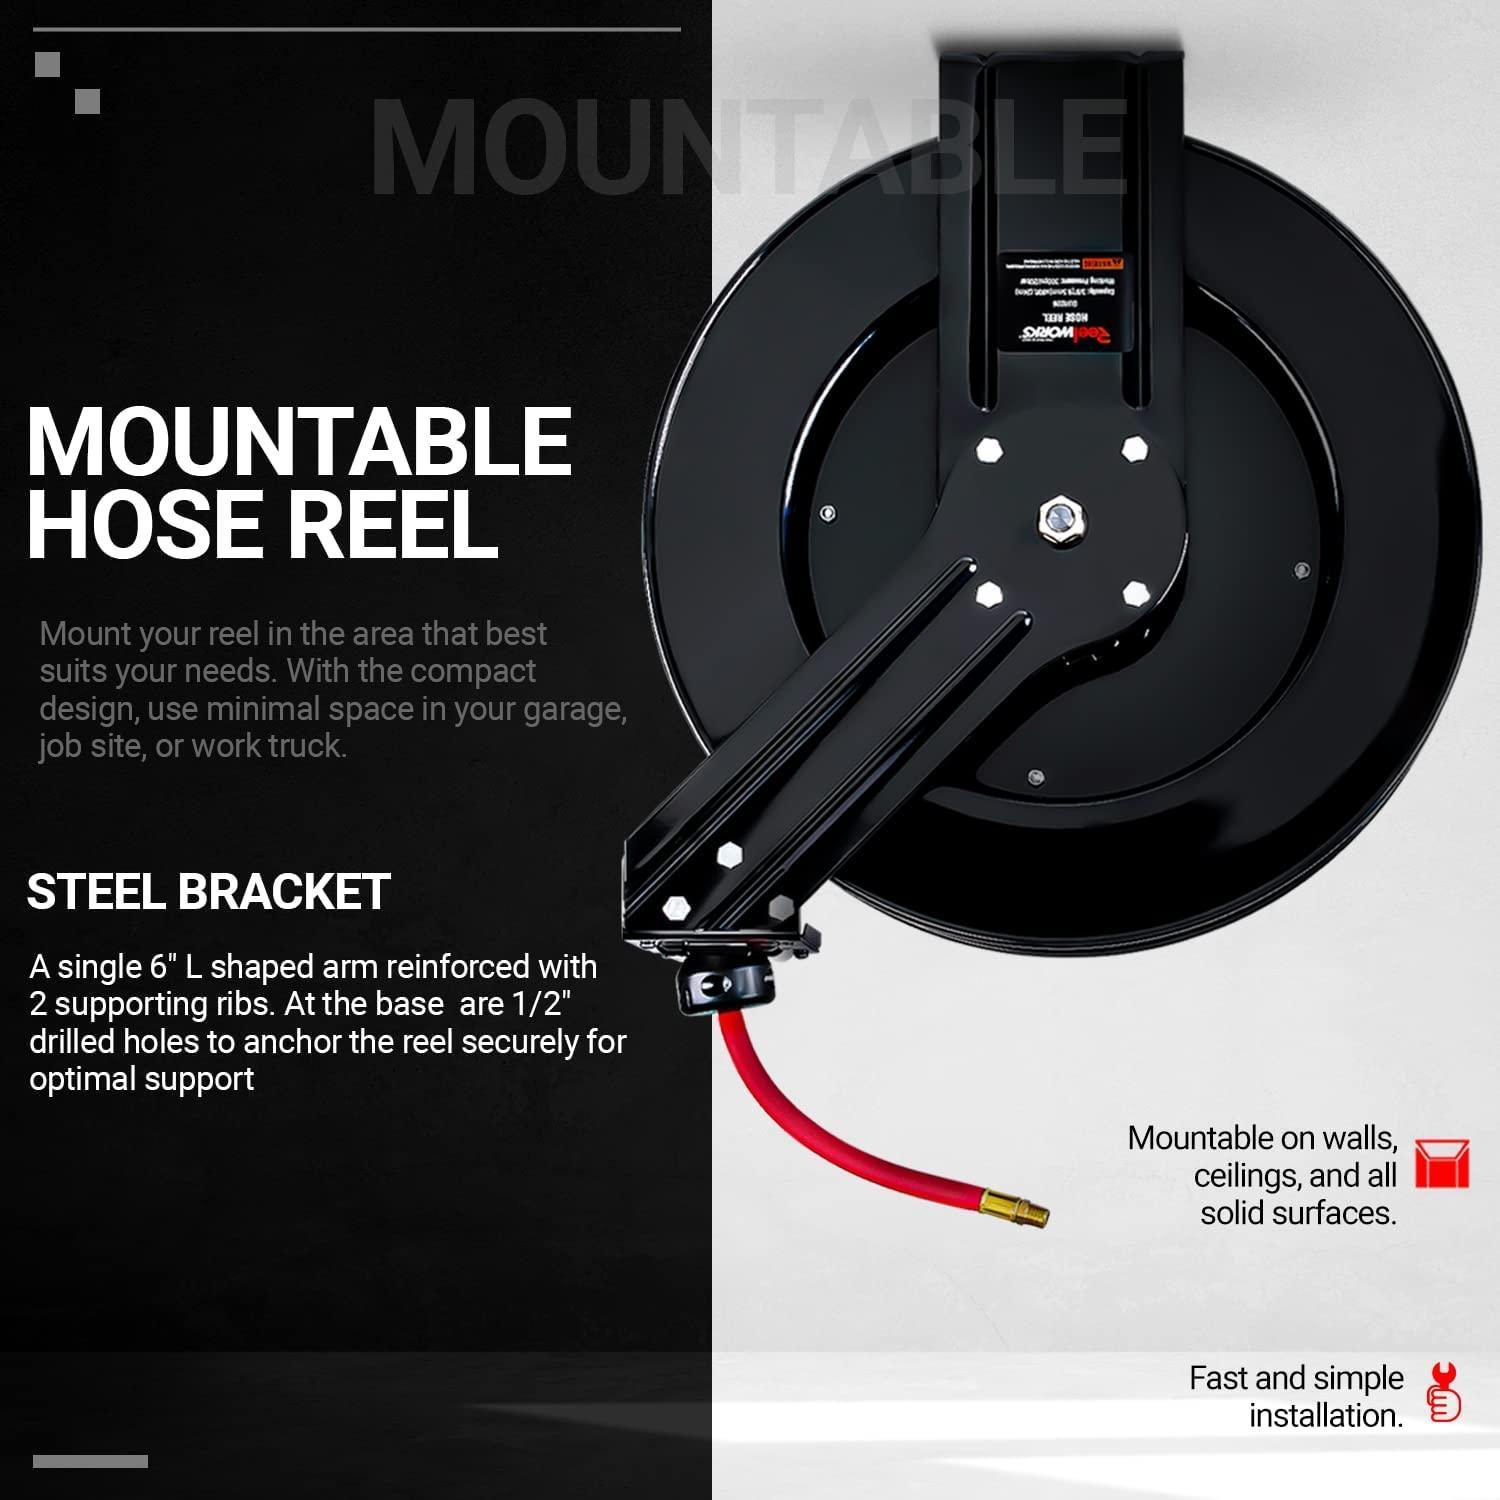 ReelWorks Industrial Retractable Air Hose Reel - 3/8" x 80' Ft, 300 PSI Max, 1/4" MNPT Connections, Single Arm Air Hose Reel